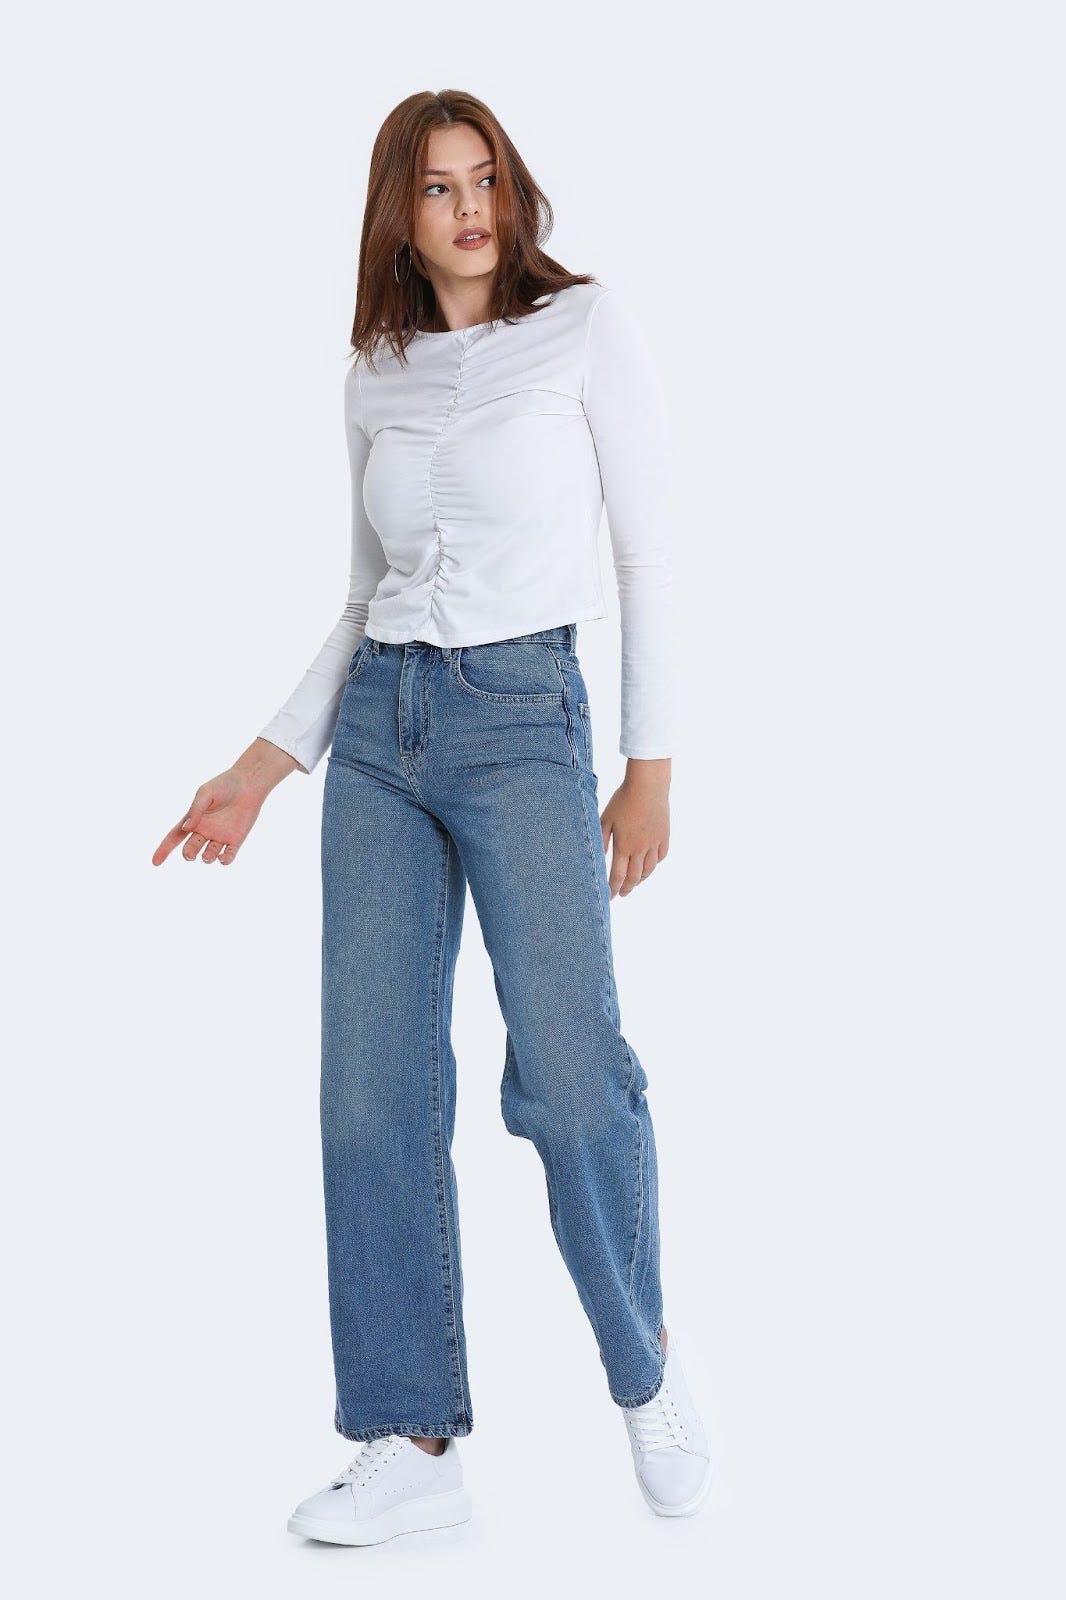 How can I make my thick thighs look thinner in jeans?